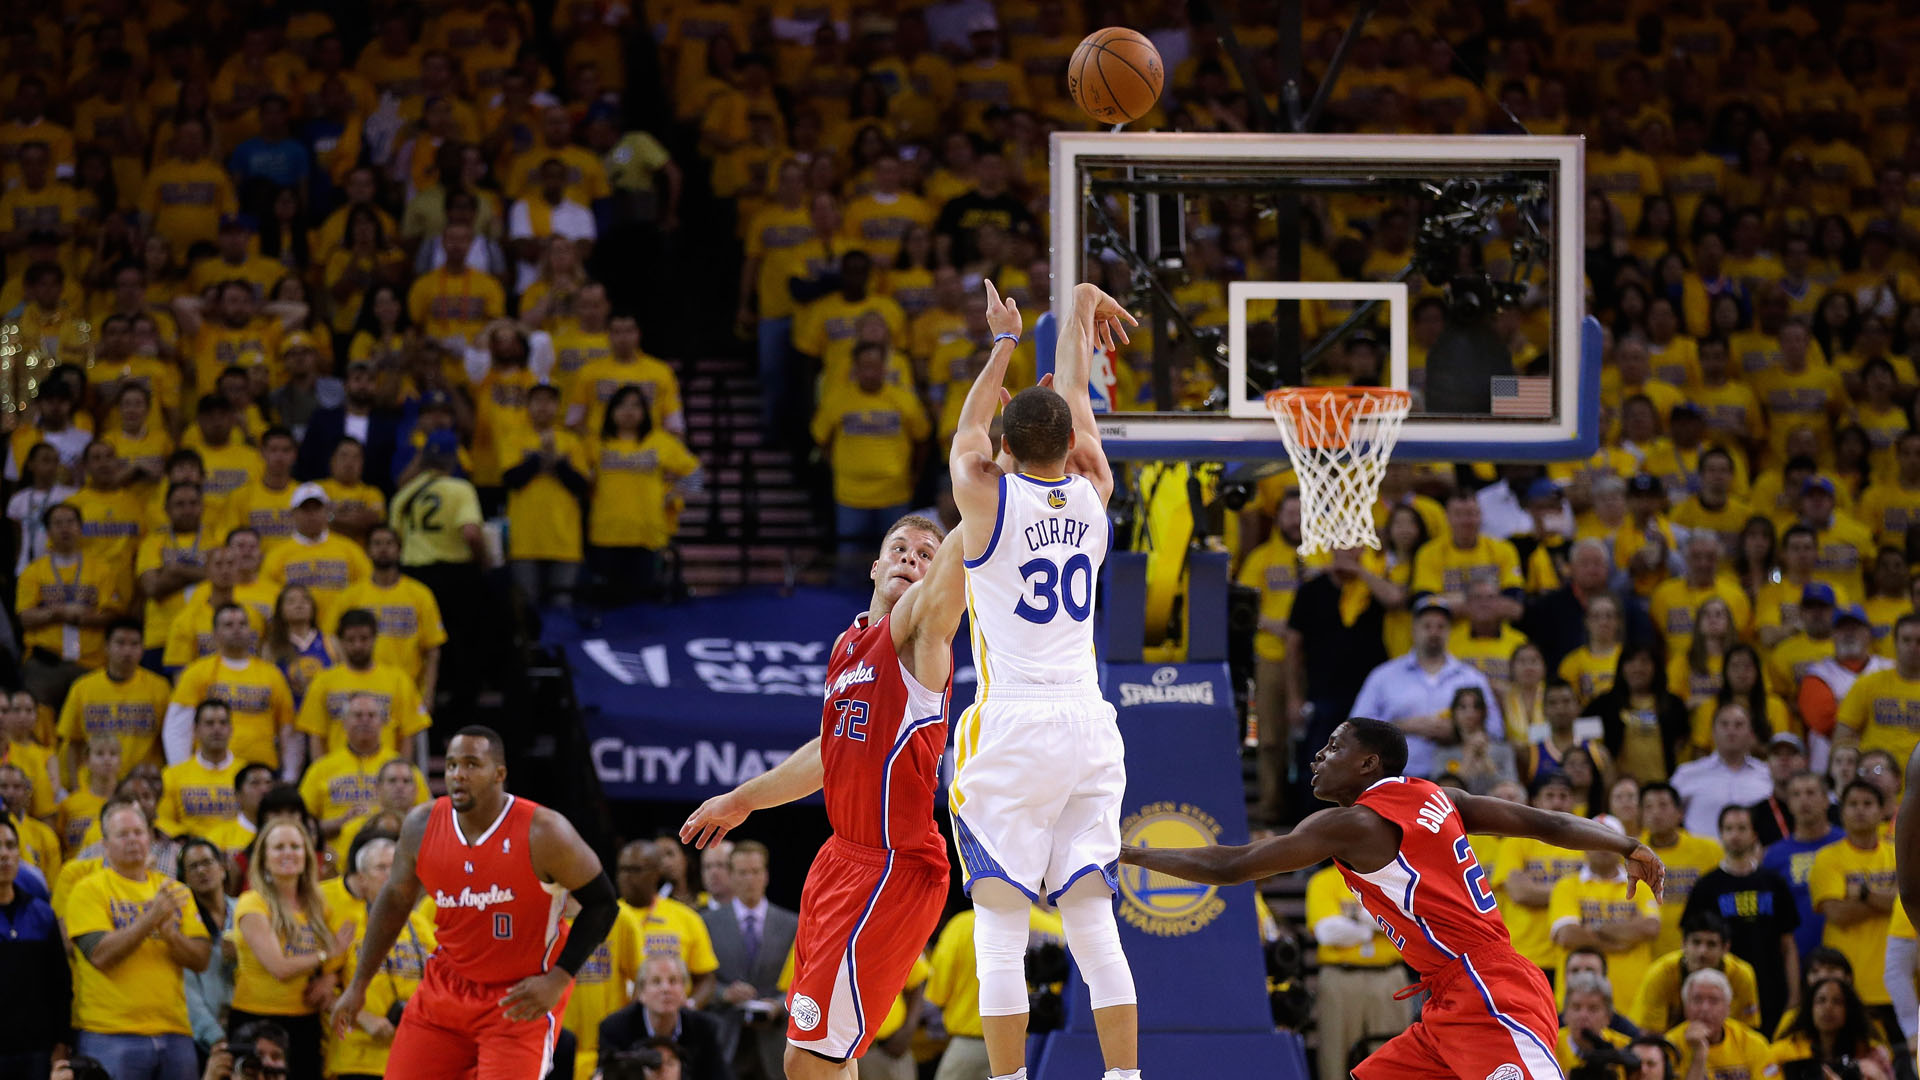 Download Steph Curry Shooting A Three-Pointer Wallpaper